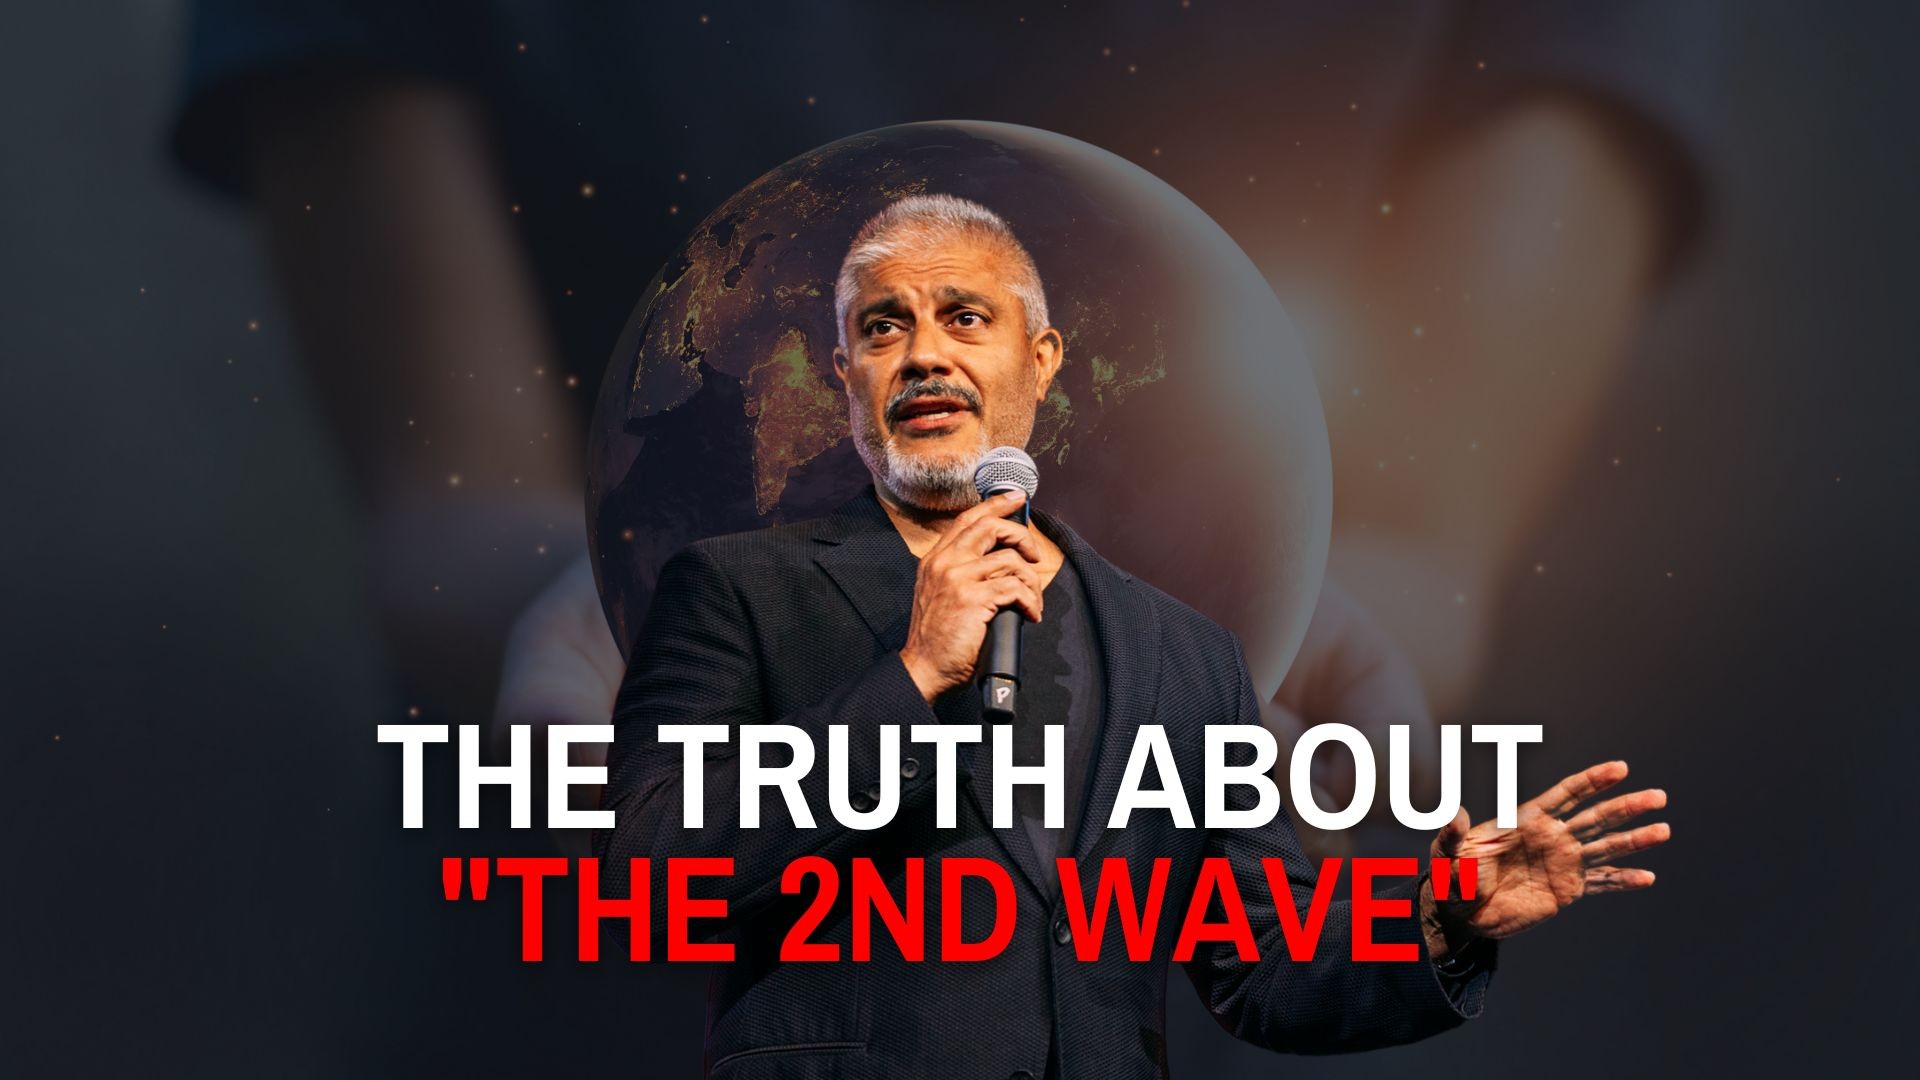 â�£The Truth About The 2nd Wave (Bill Gates, Dr Fauci) - Dr Rashid A Buttar